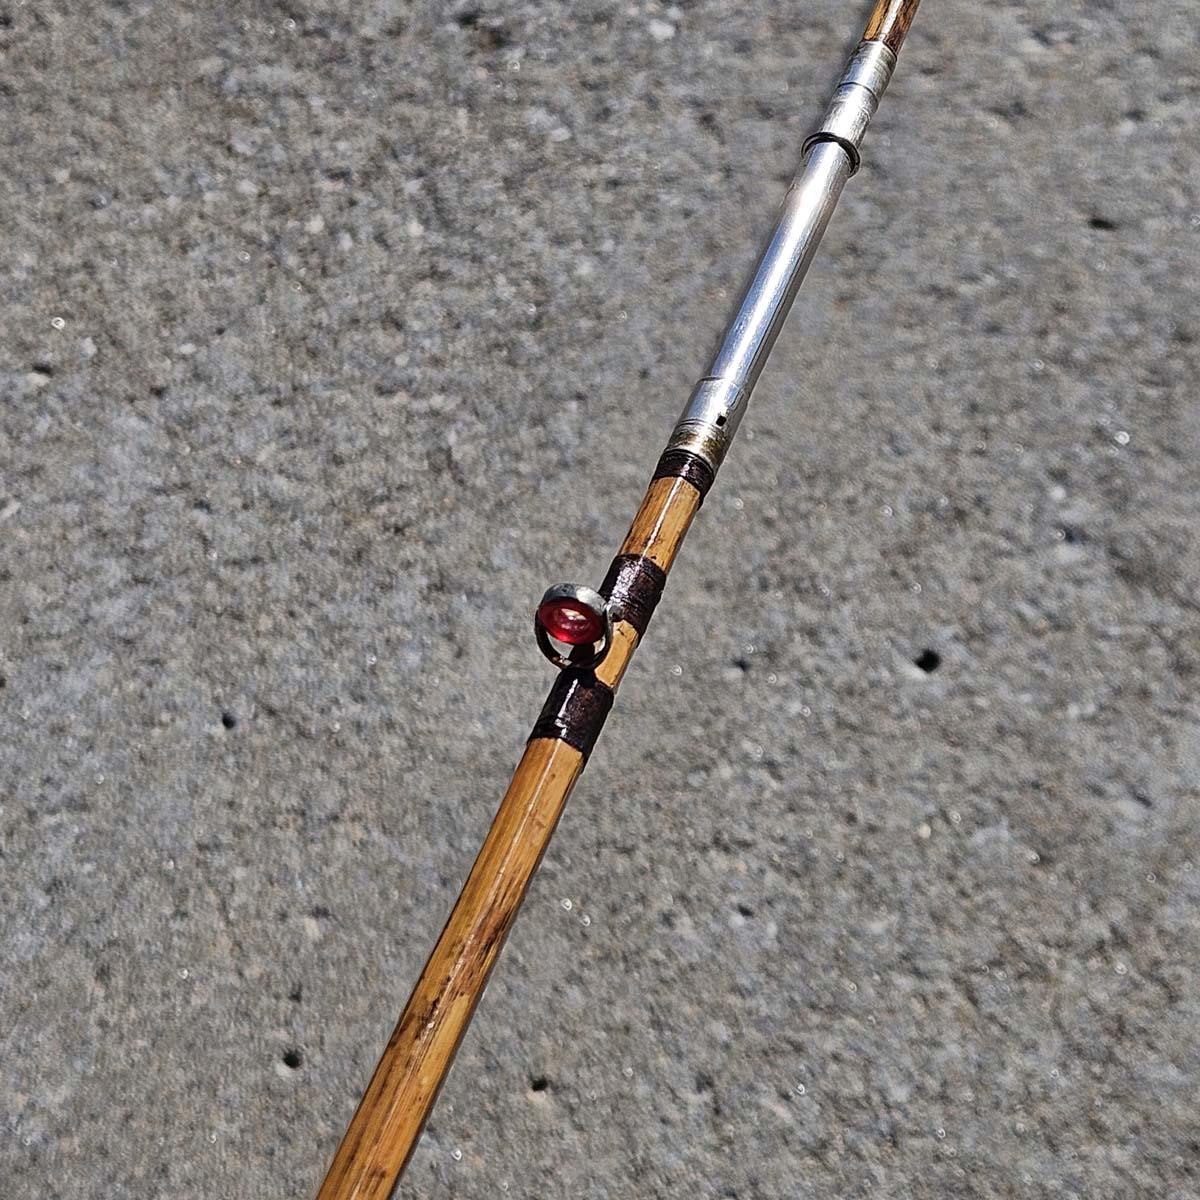 Vintage Bamboo Fly Fishing Pole - 112